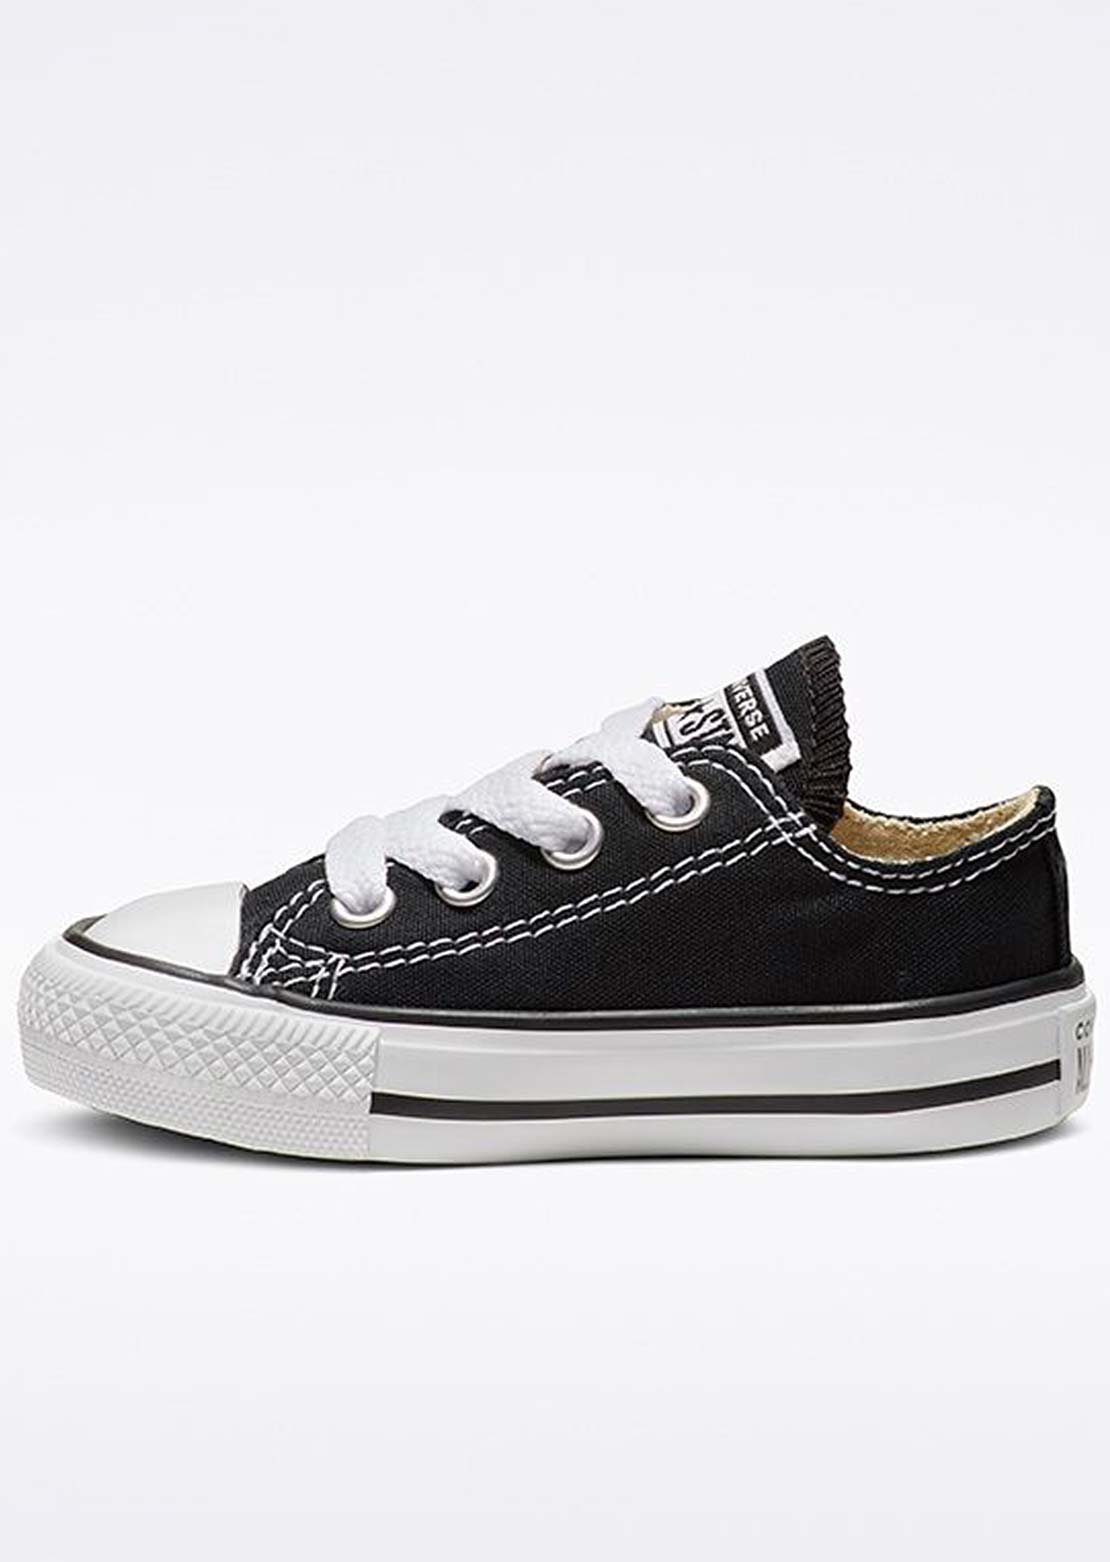 Converse Infant Chuck Taylor All Star Low-Top Shoes Black